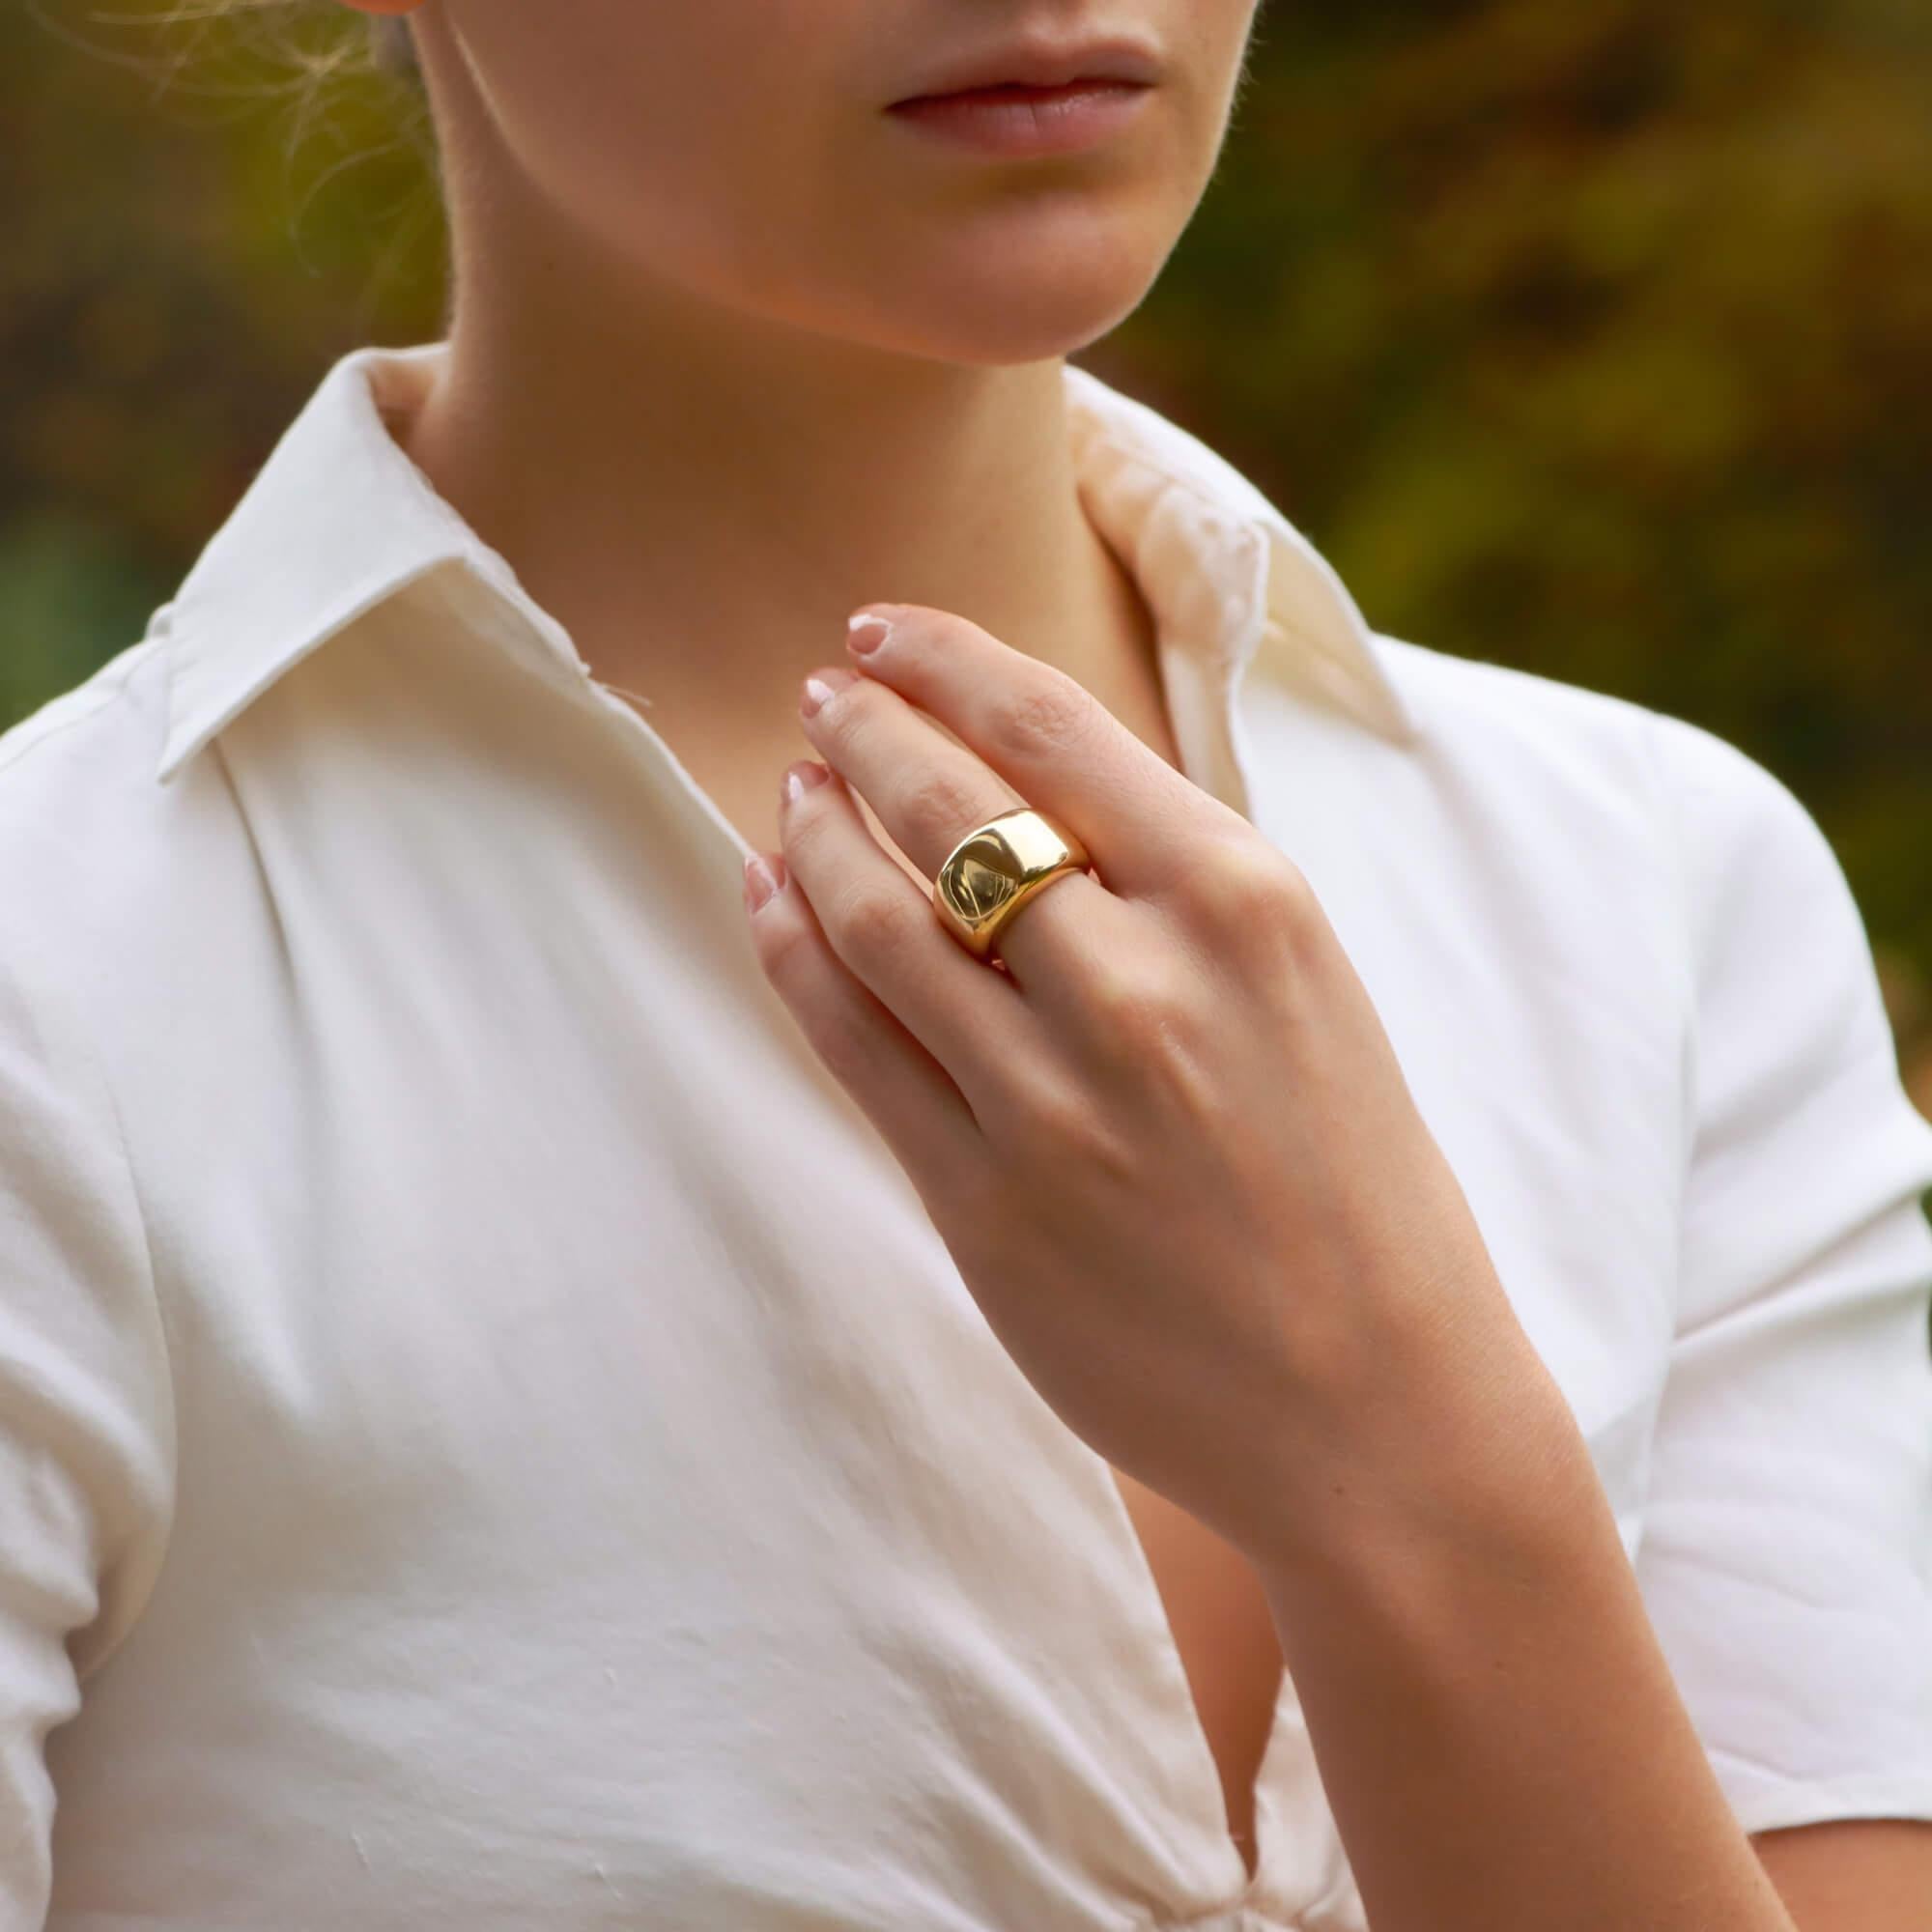 A beautiful vintage Cartier ‘New Wave’ bombe ring set in 18k yellow gold.

From the now discontinued New Wave collection, the ring is composed of a bombe design. 

Due to the design and size this ring could be worn for a variety of occasions. The